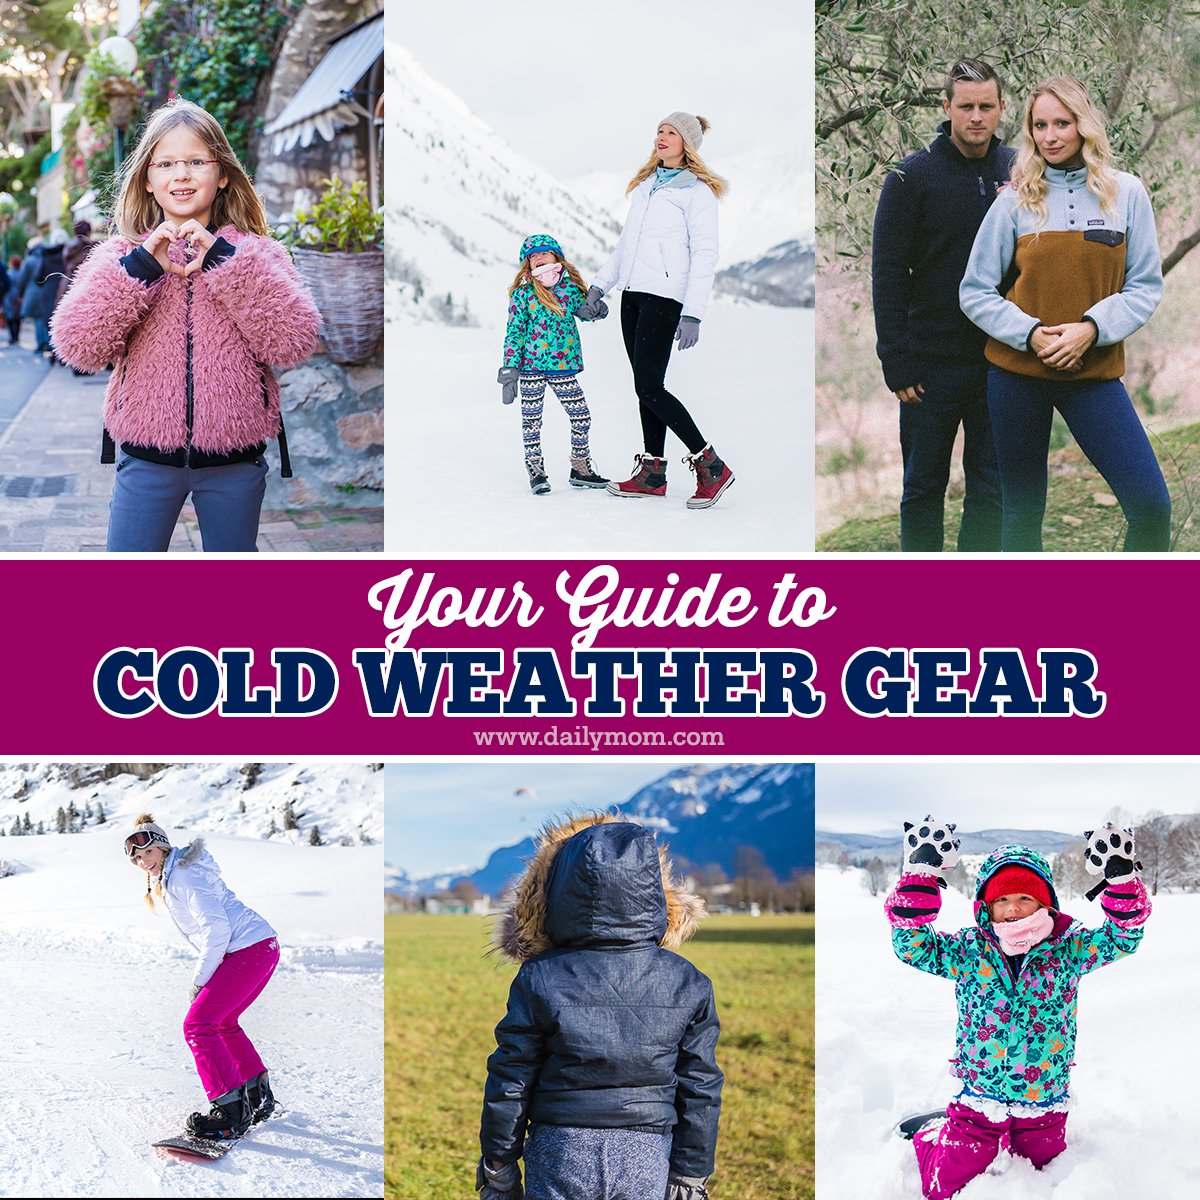 Winter Clothing & Gear: Breaking Down the Basics